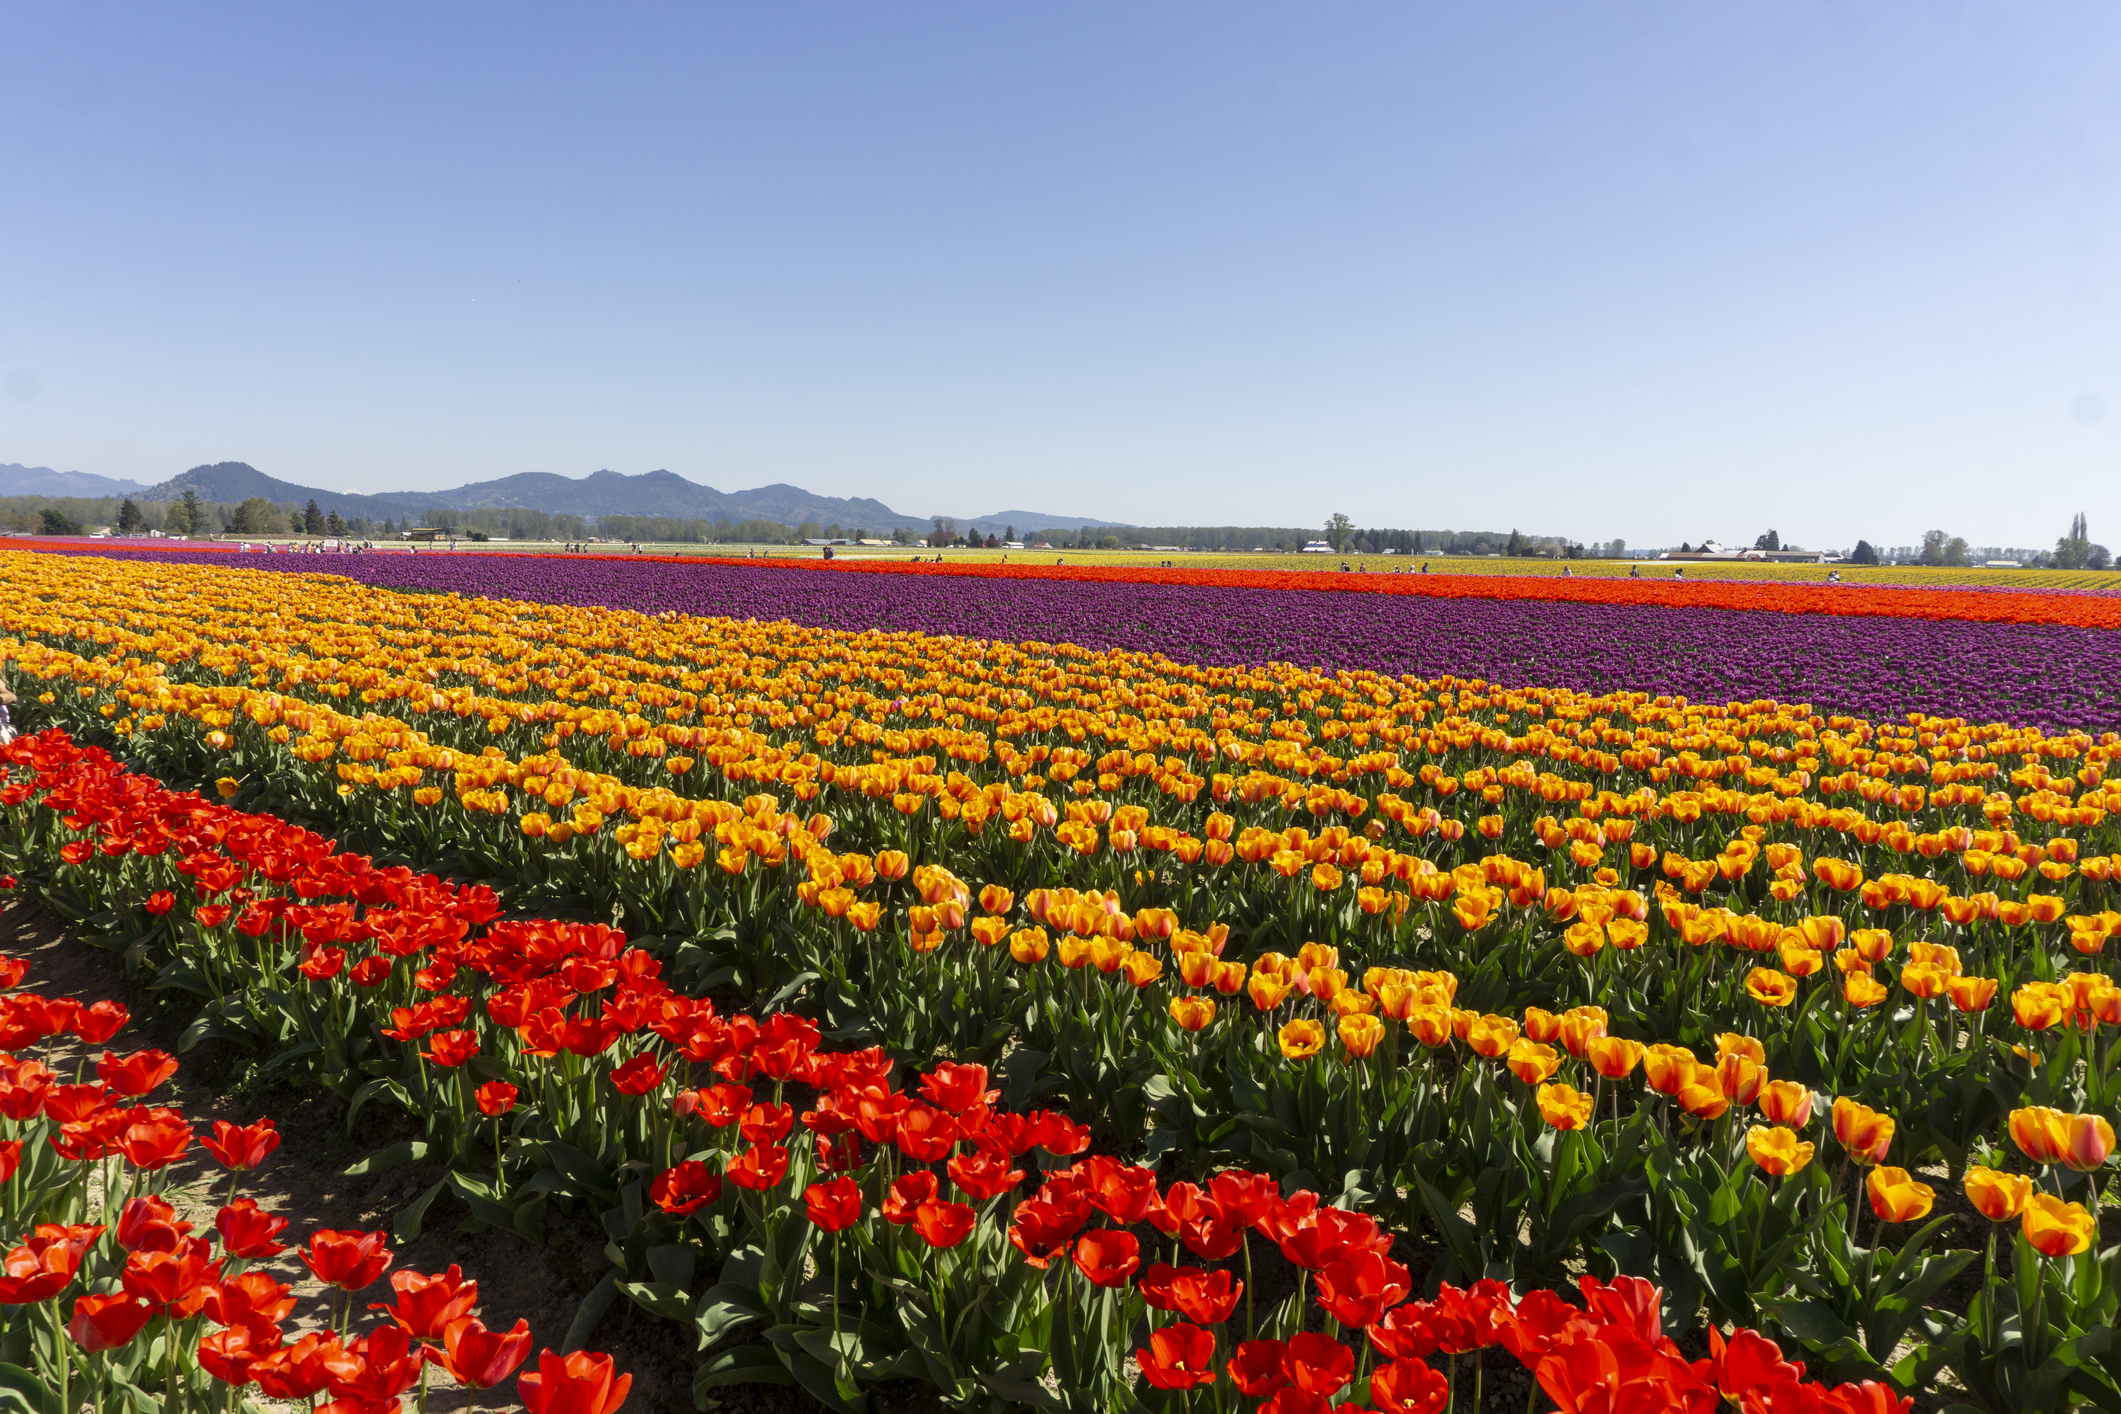 A colorful field of tulips under a blue sky.